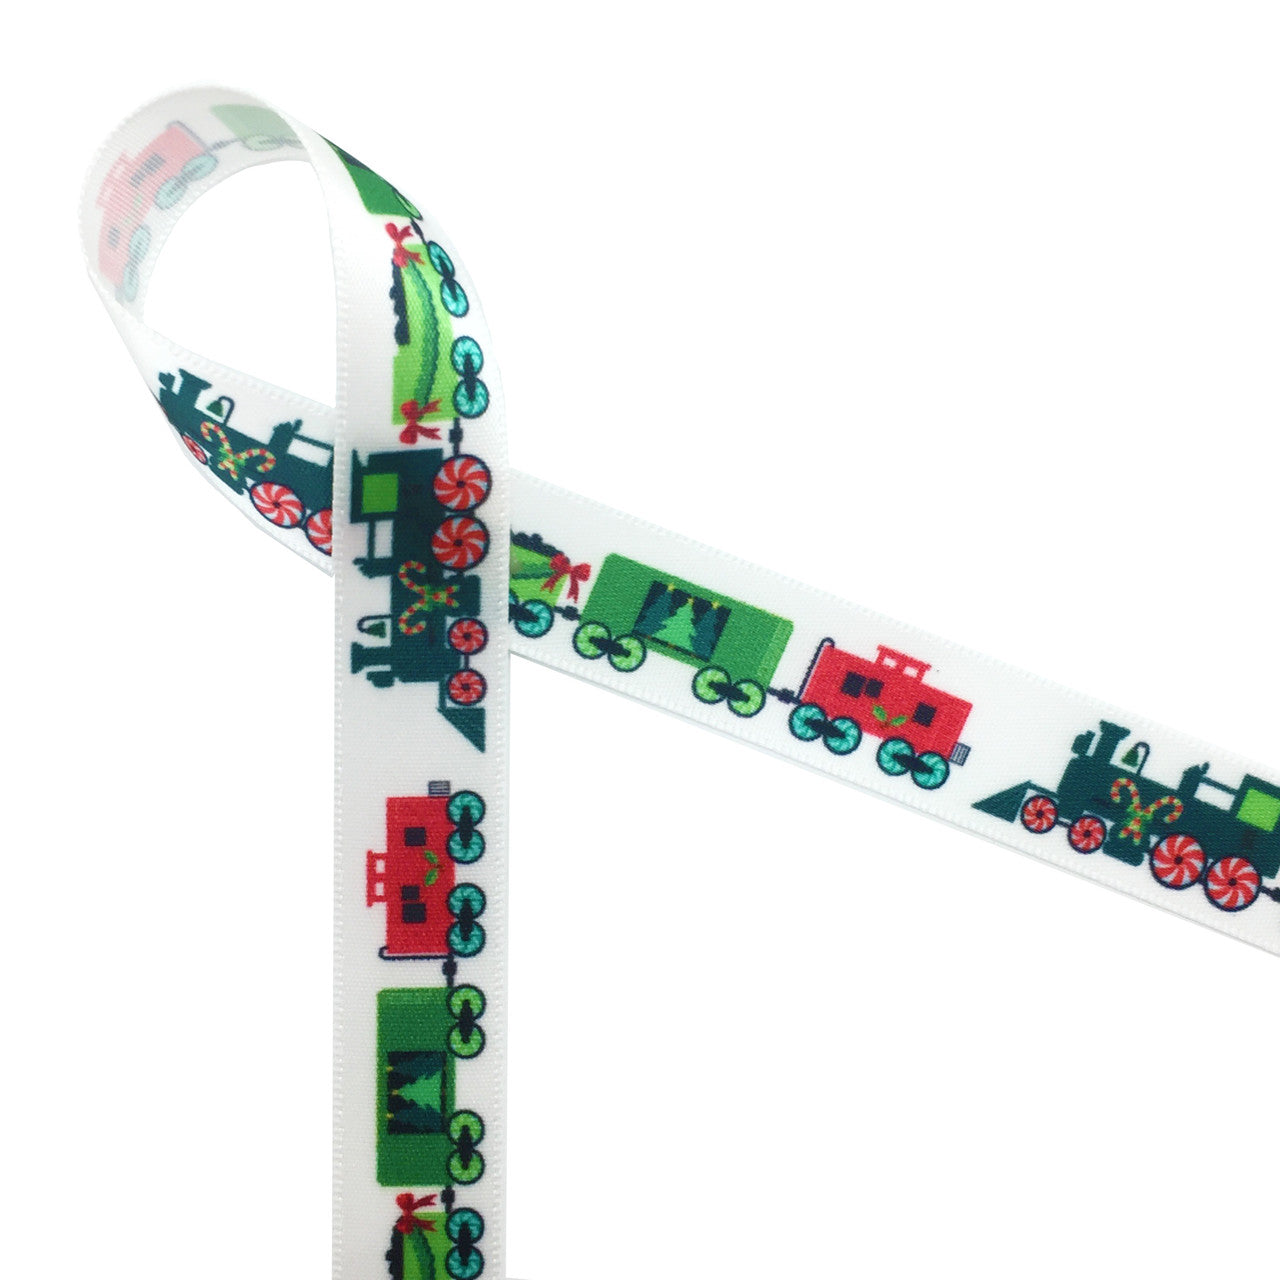 The Christmas train chugging along the tracks is a fun accent ribbon for favors, packages and table decor. This ribbon is printed on 5/8" white single face satin and is designed and printed in the USA